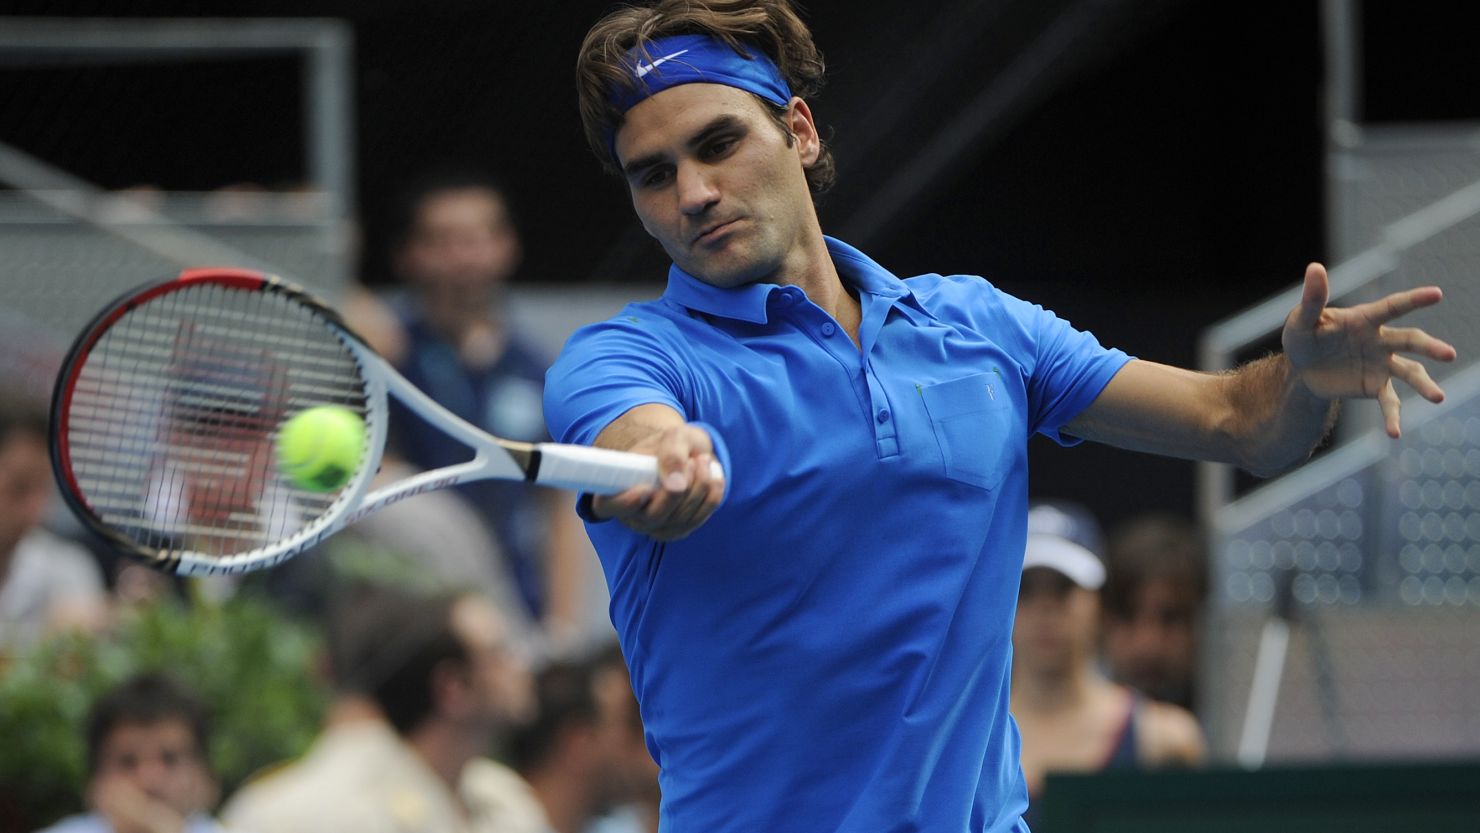 Roger Federer will be number two in the world in the new rankings released on Monday.